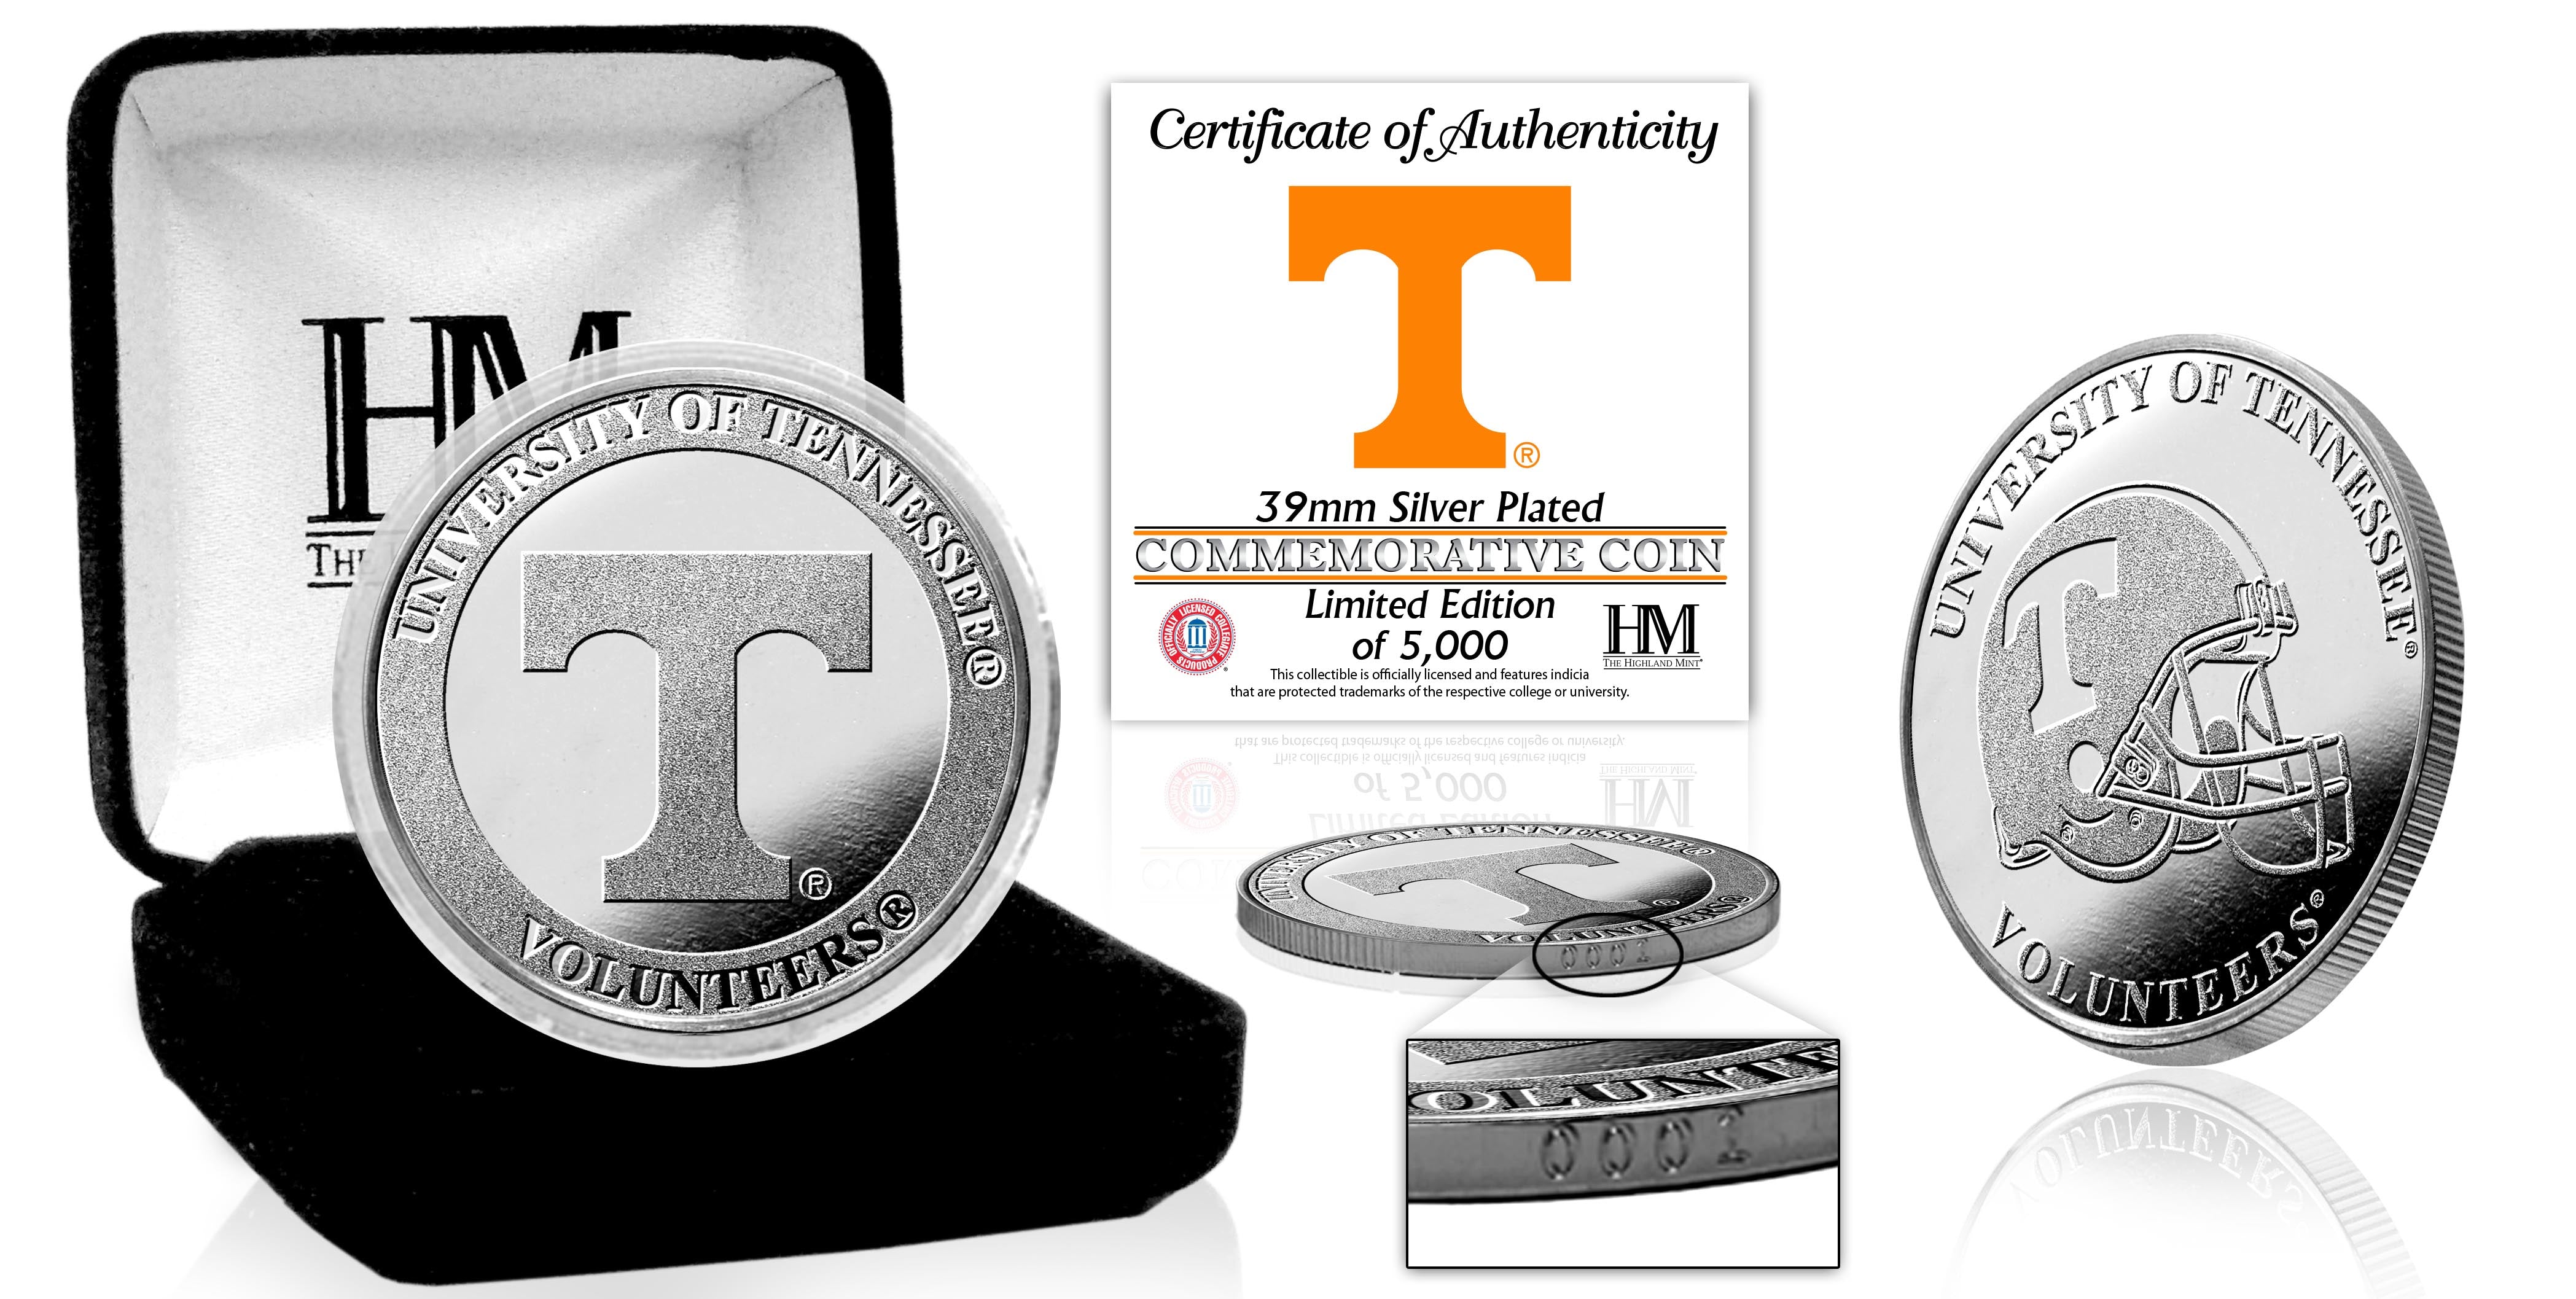 University of Tennessee Volunteers Silver Mint Coin